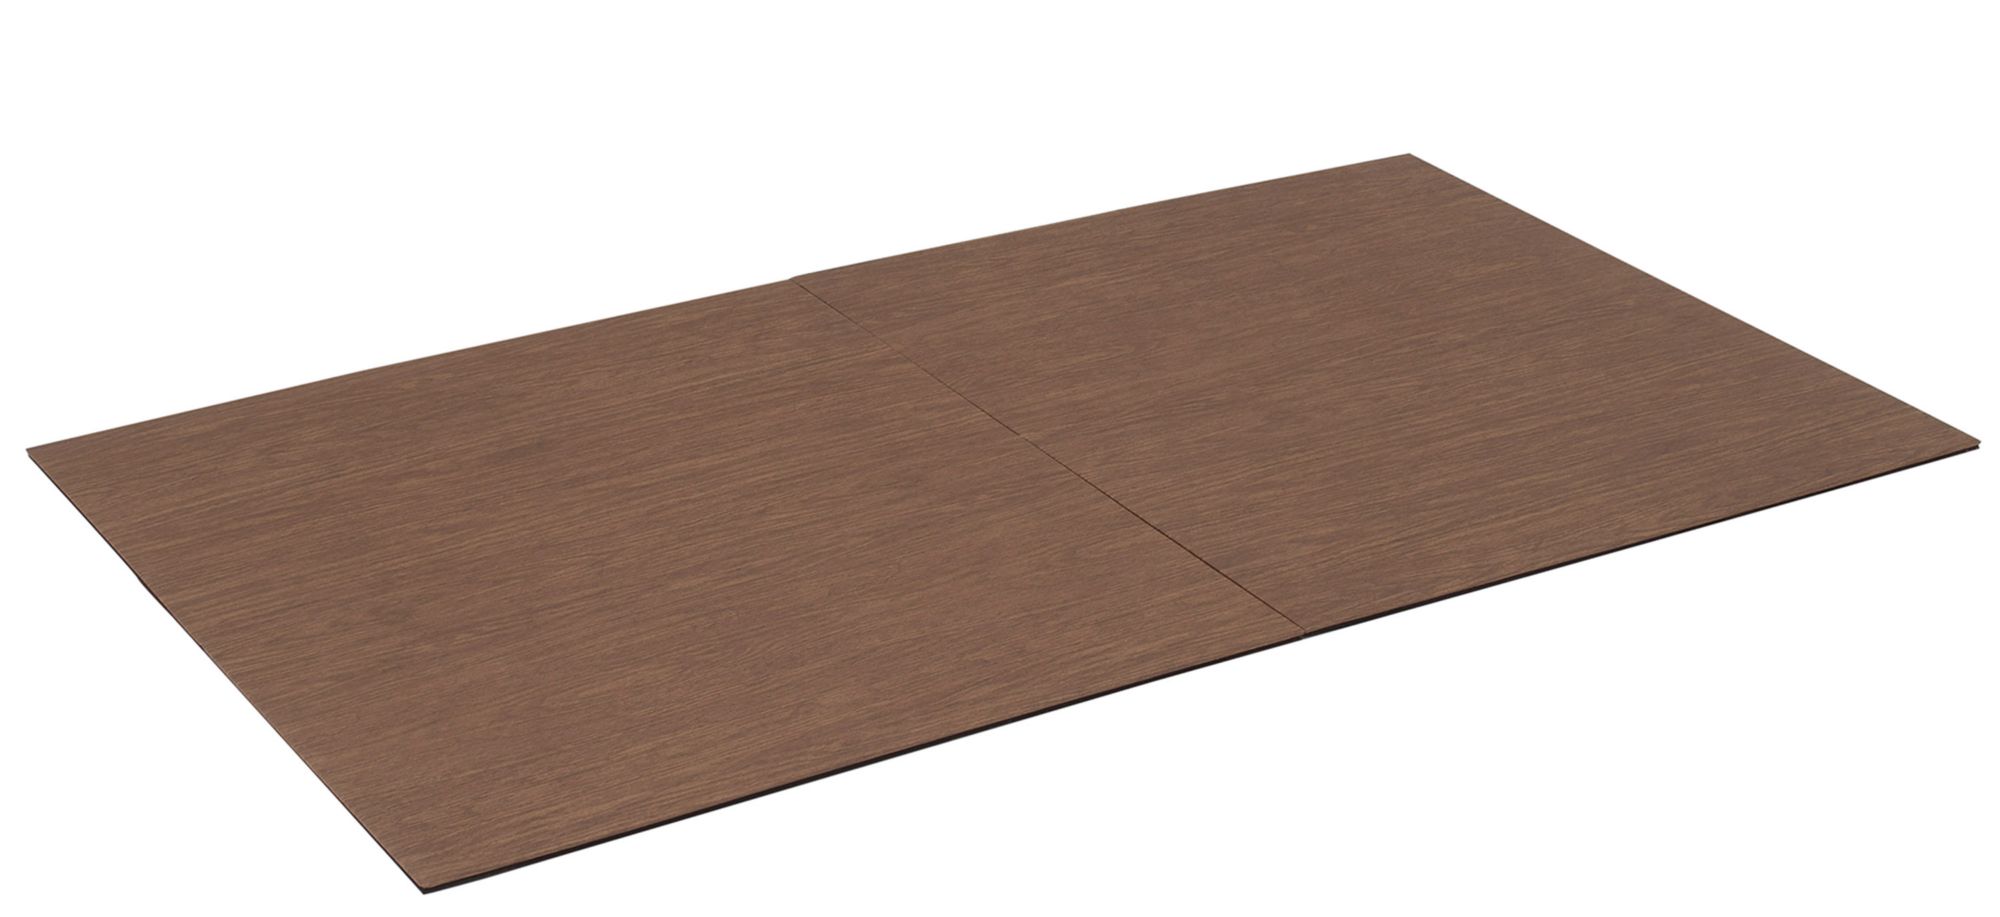 Coventry Dining Table Protector in Oak/Brown Felt by International Table Pads